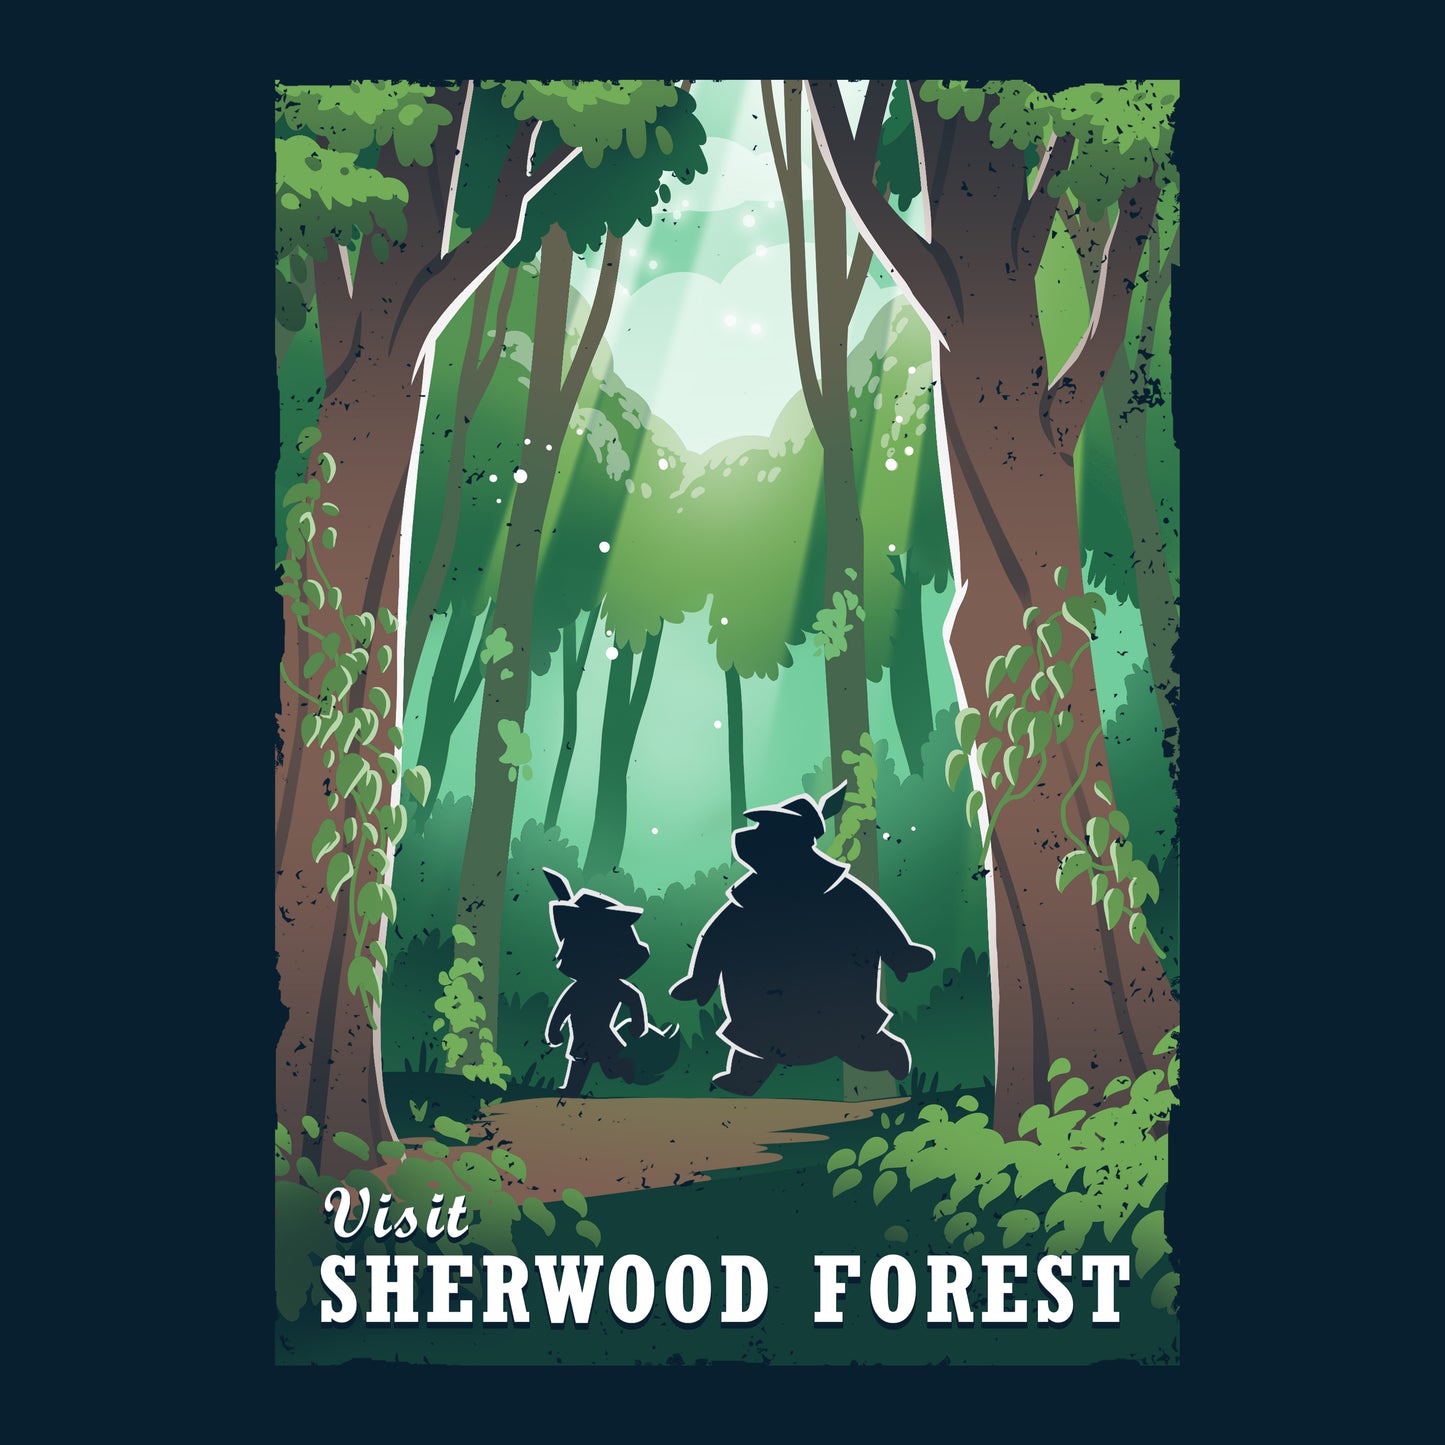 An officially licensed Sherwood Forest Travel Poster inspired by Robin Hood from Disney.